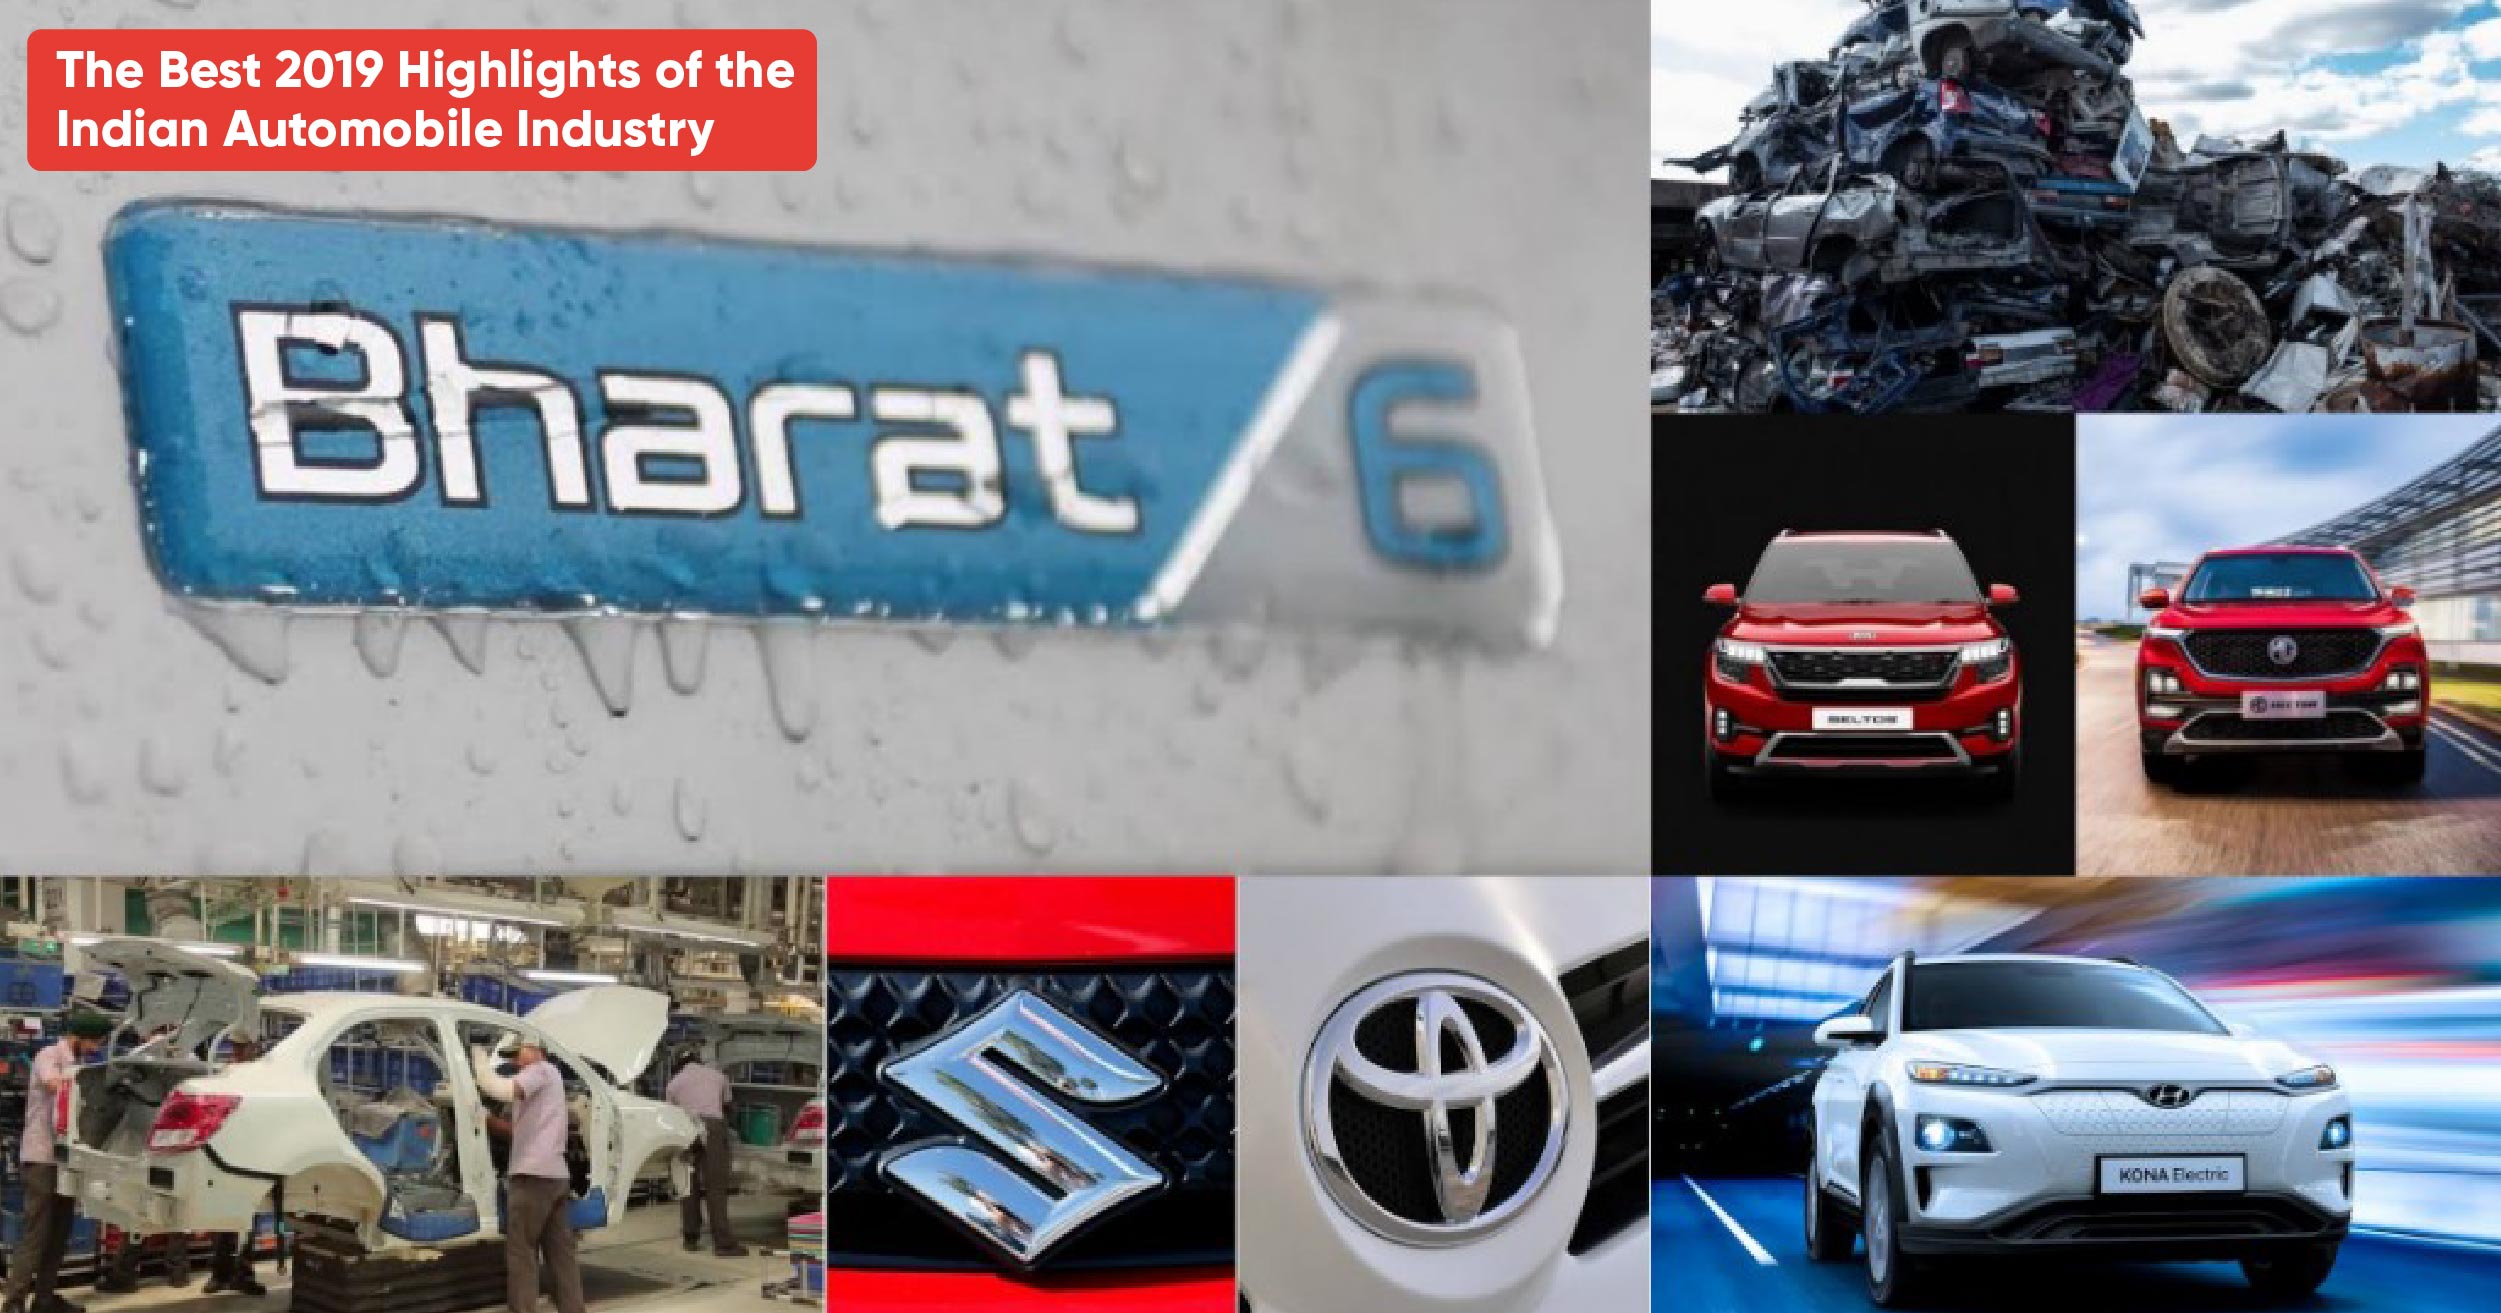 The Best Indian Automobile Highlights Of 2019